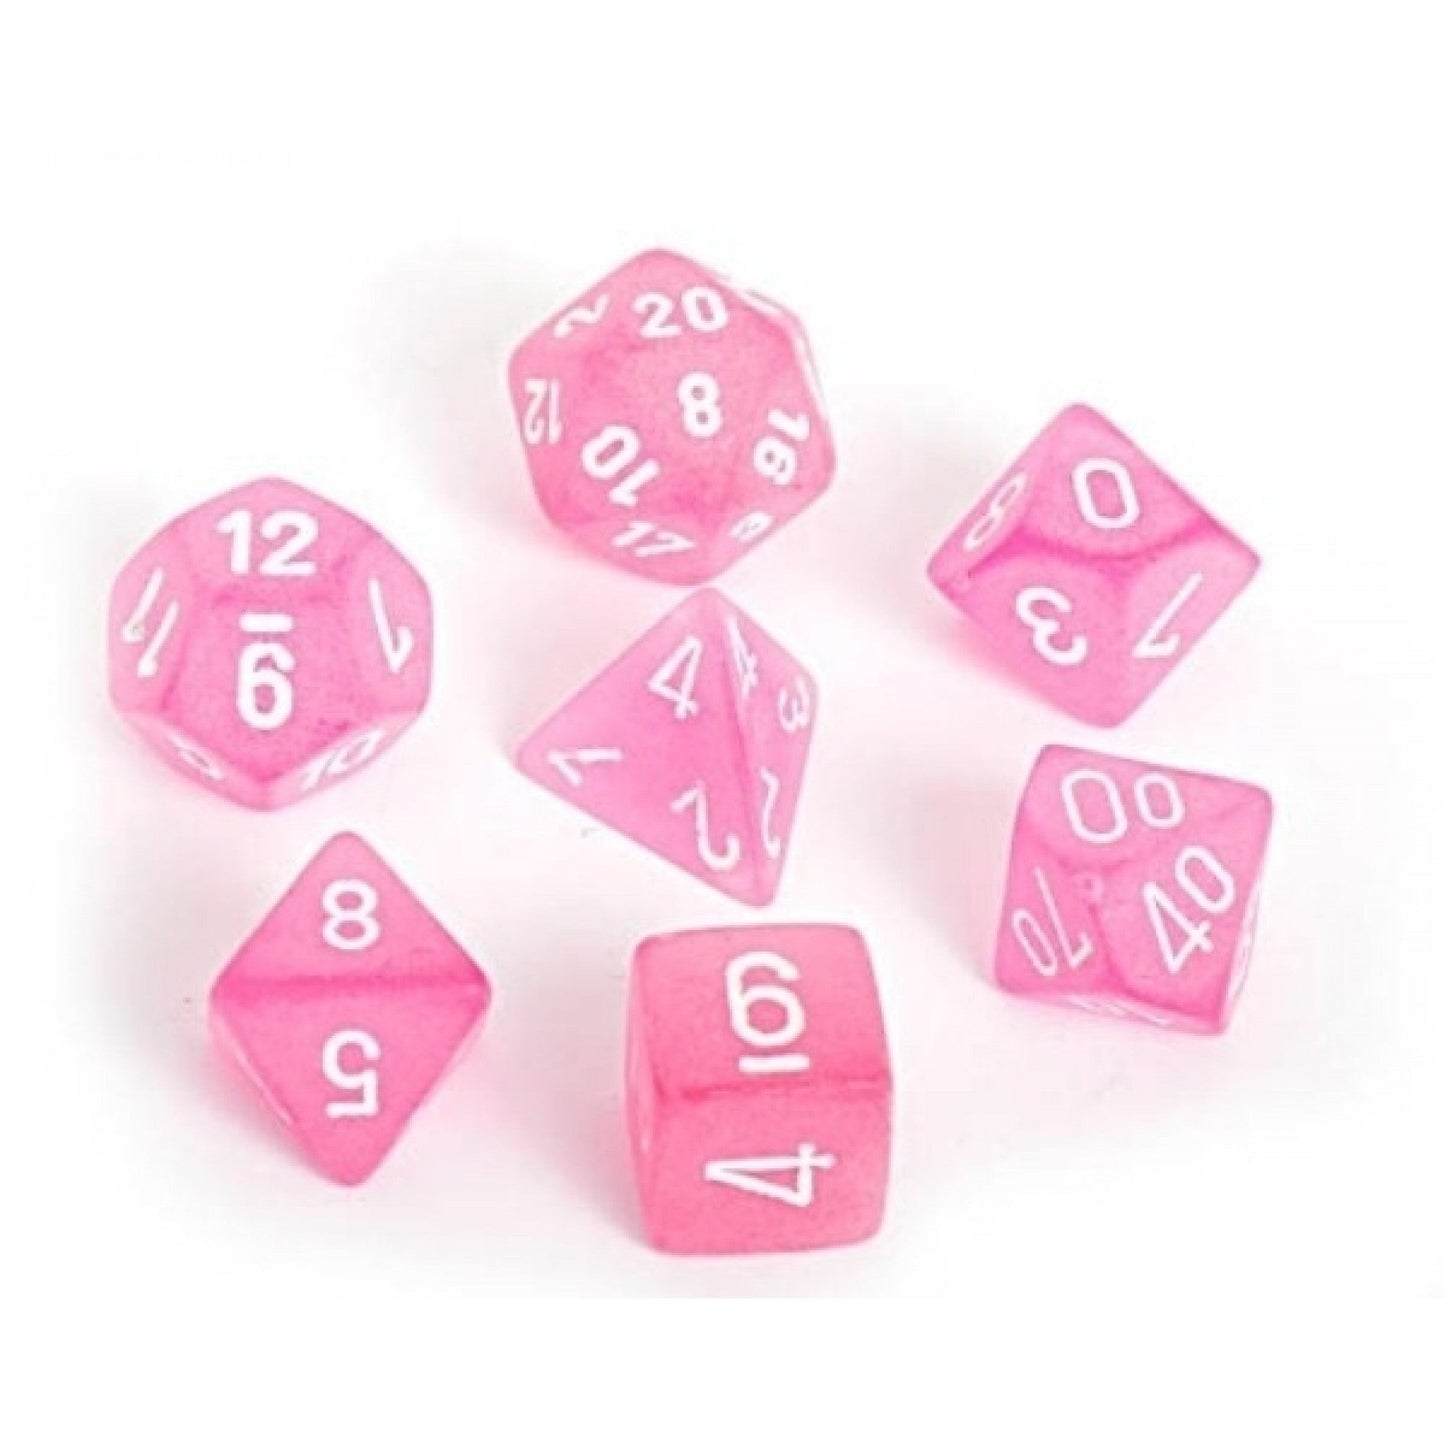 Chessex Dice: 7 Die Set - Frosted - Pink with White (CHX 27464) - Gamescape